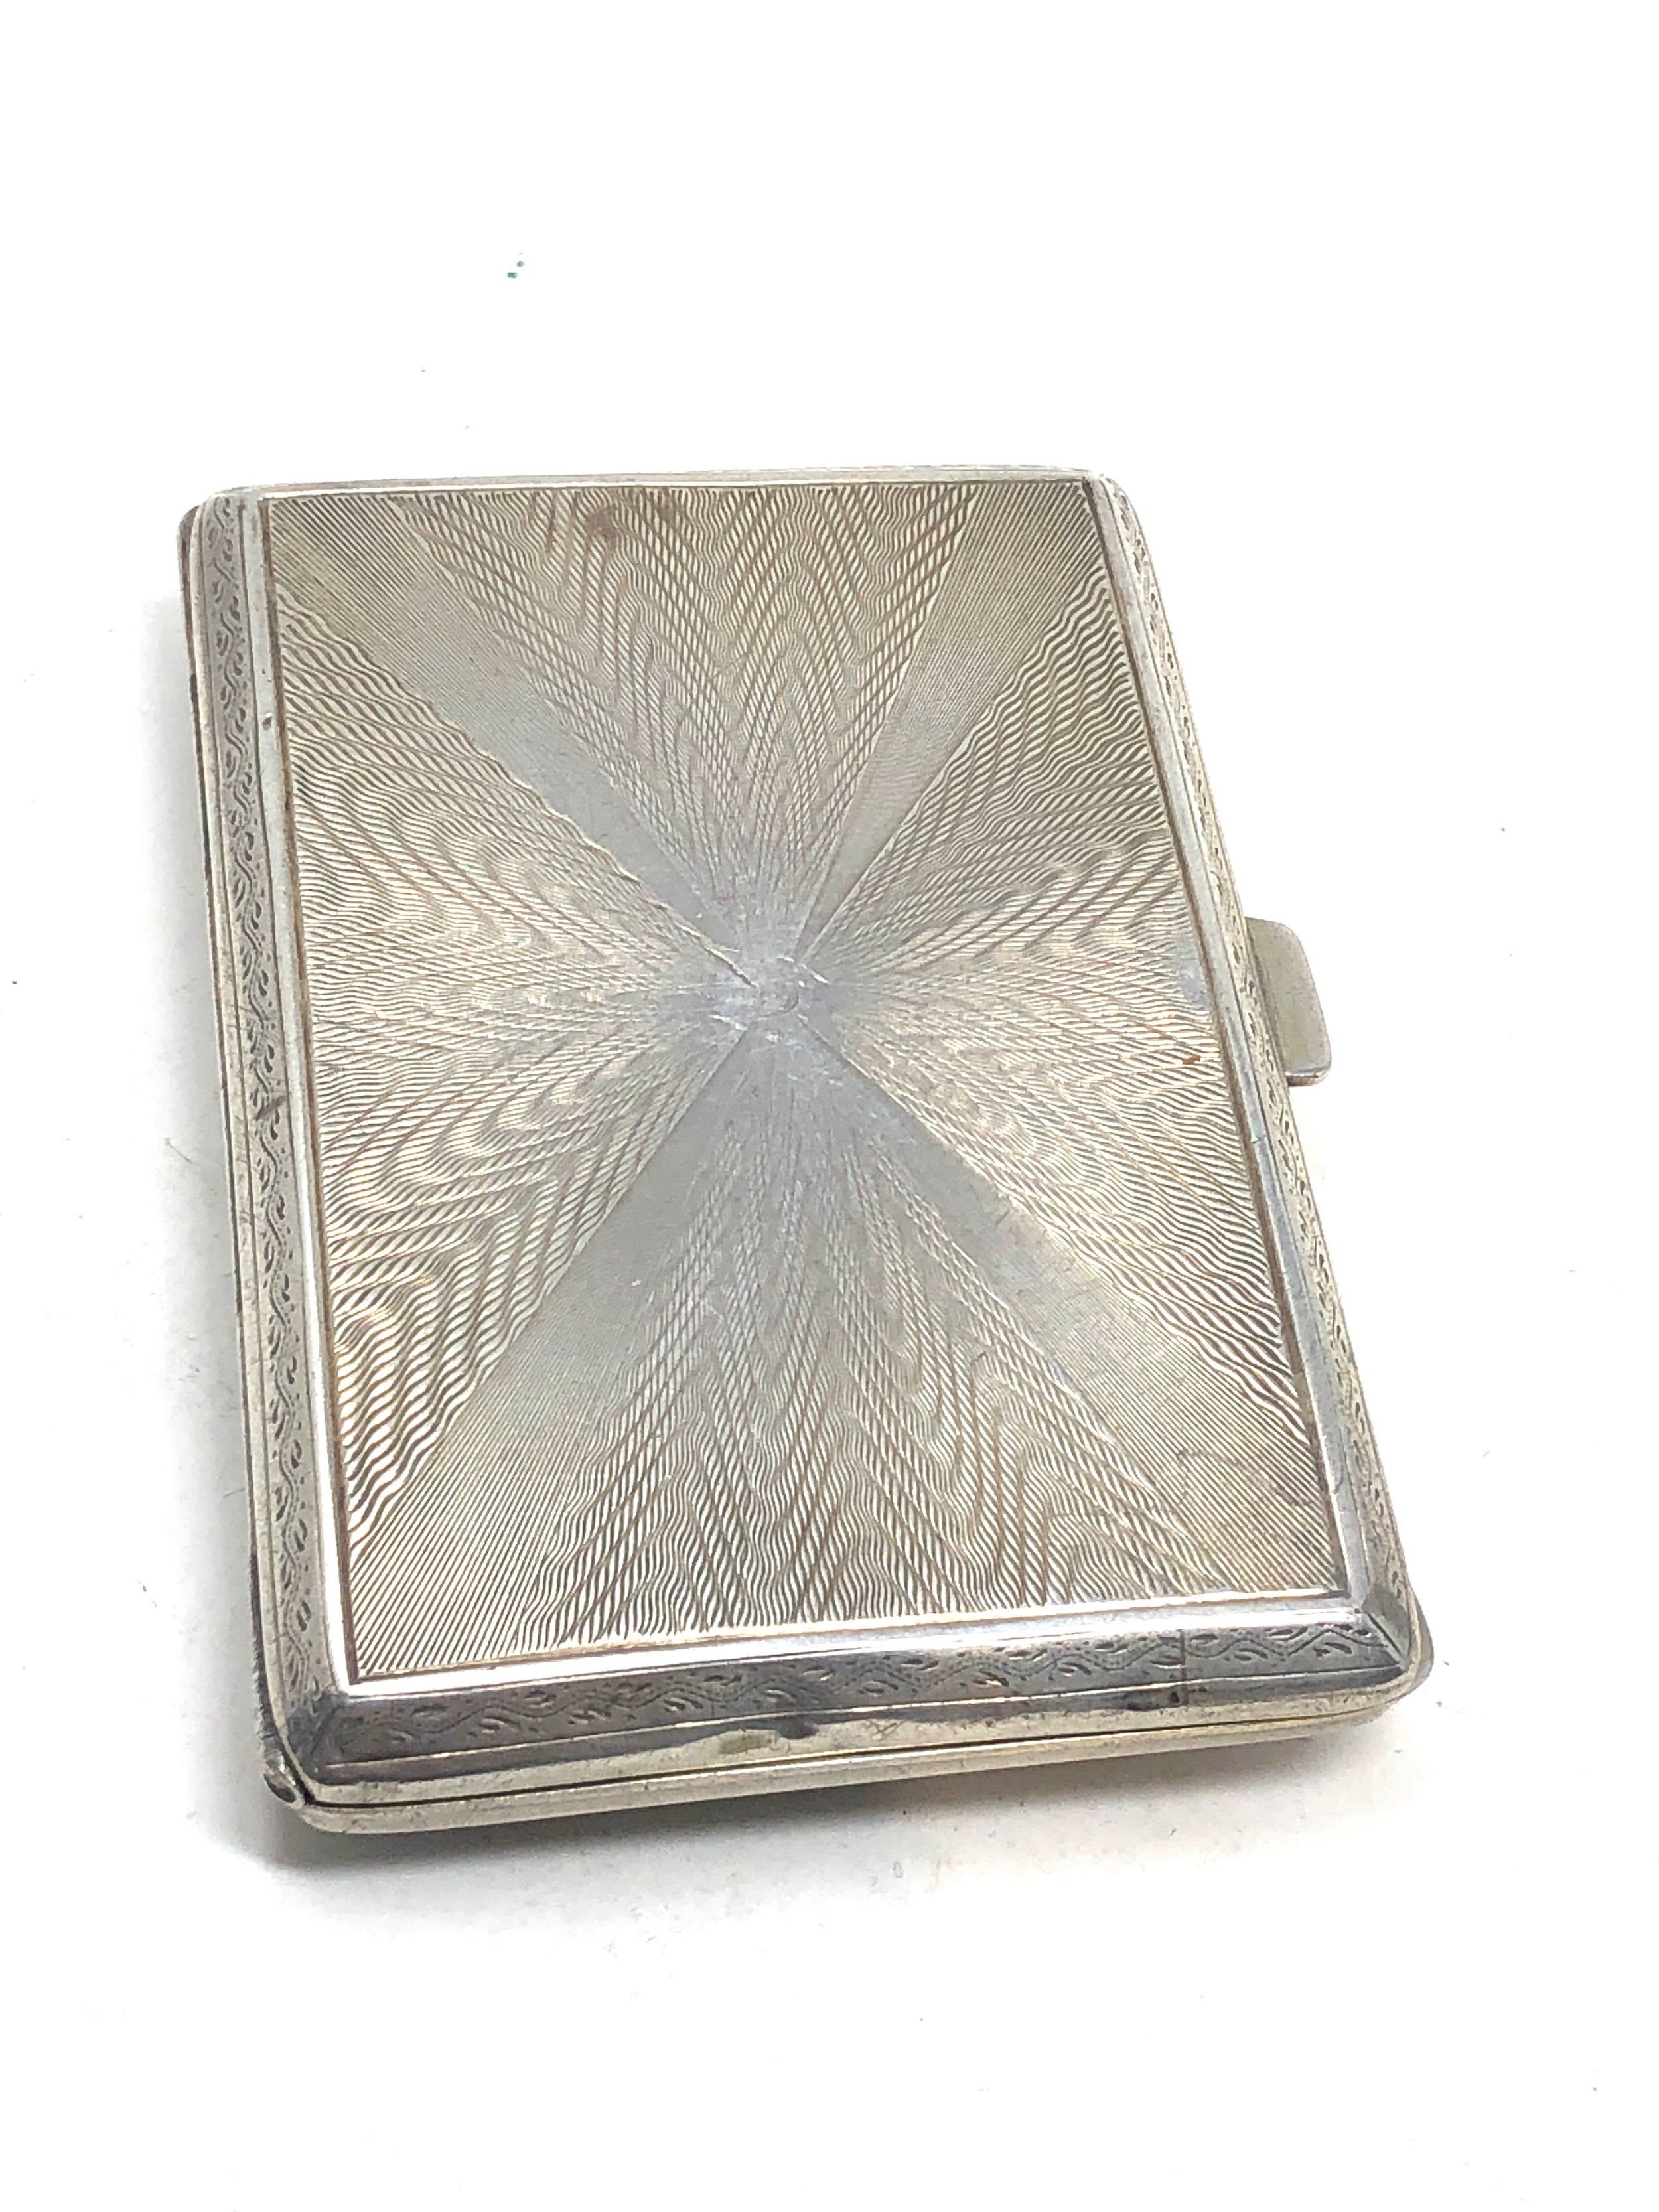 Silver & enamel cigarette case chip and wear to enamel weight 94g - Image 3 of 4